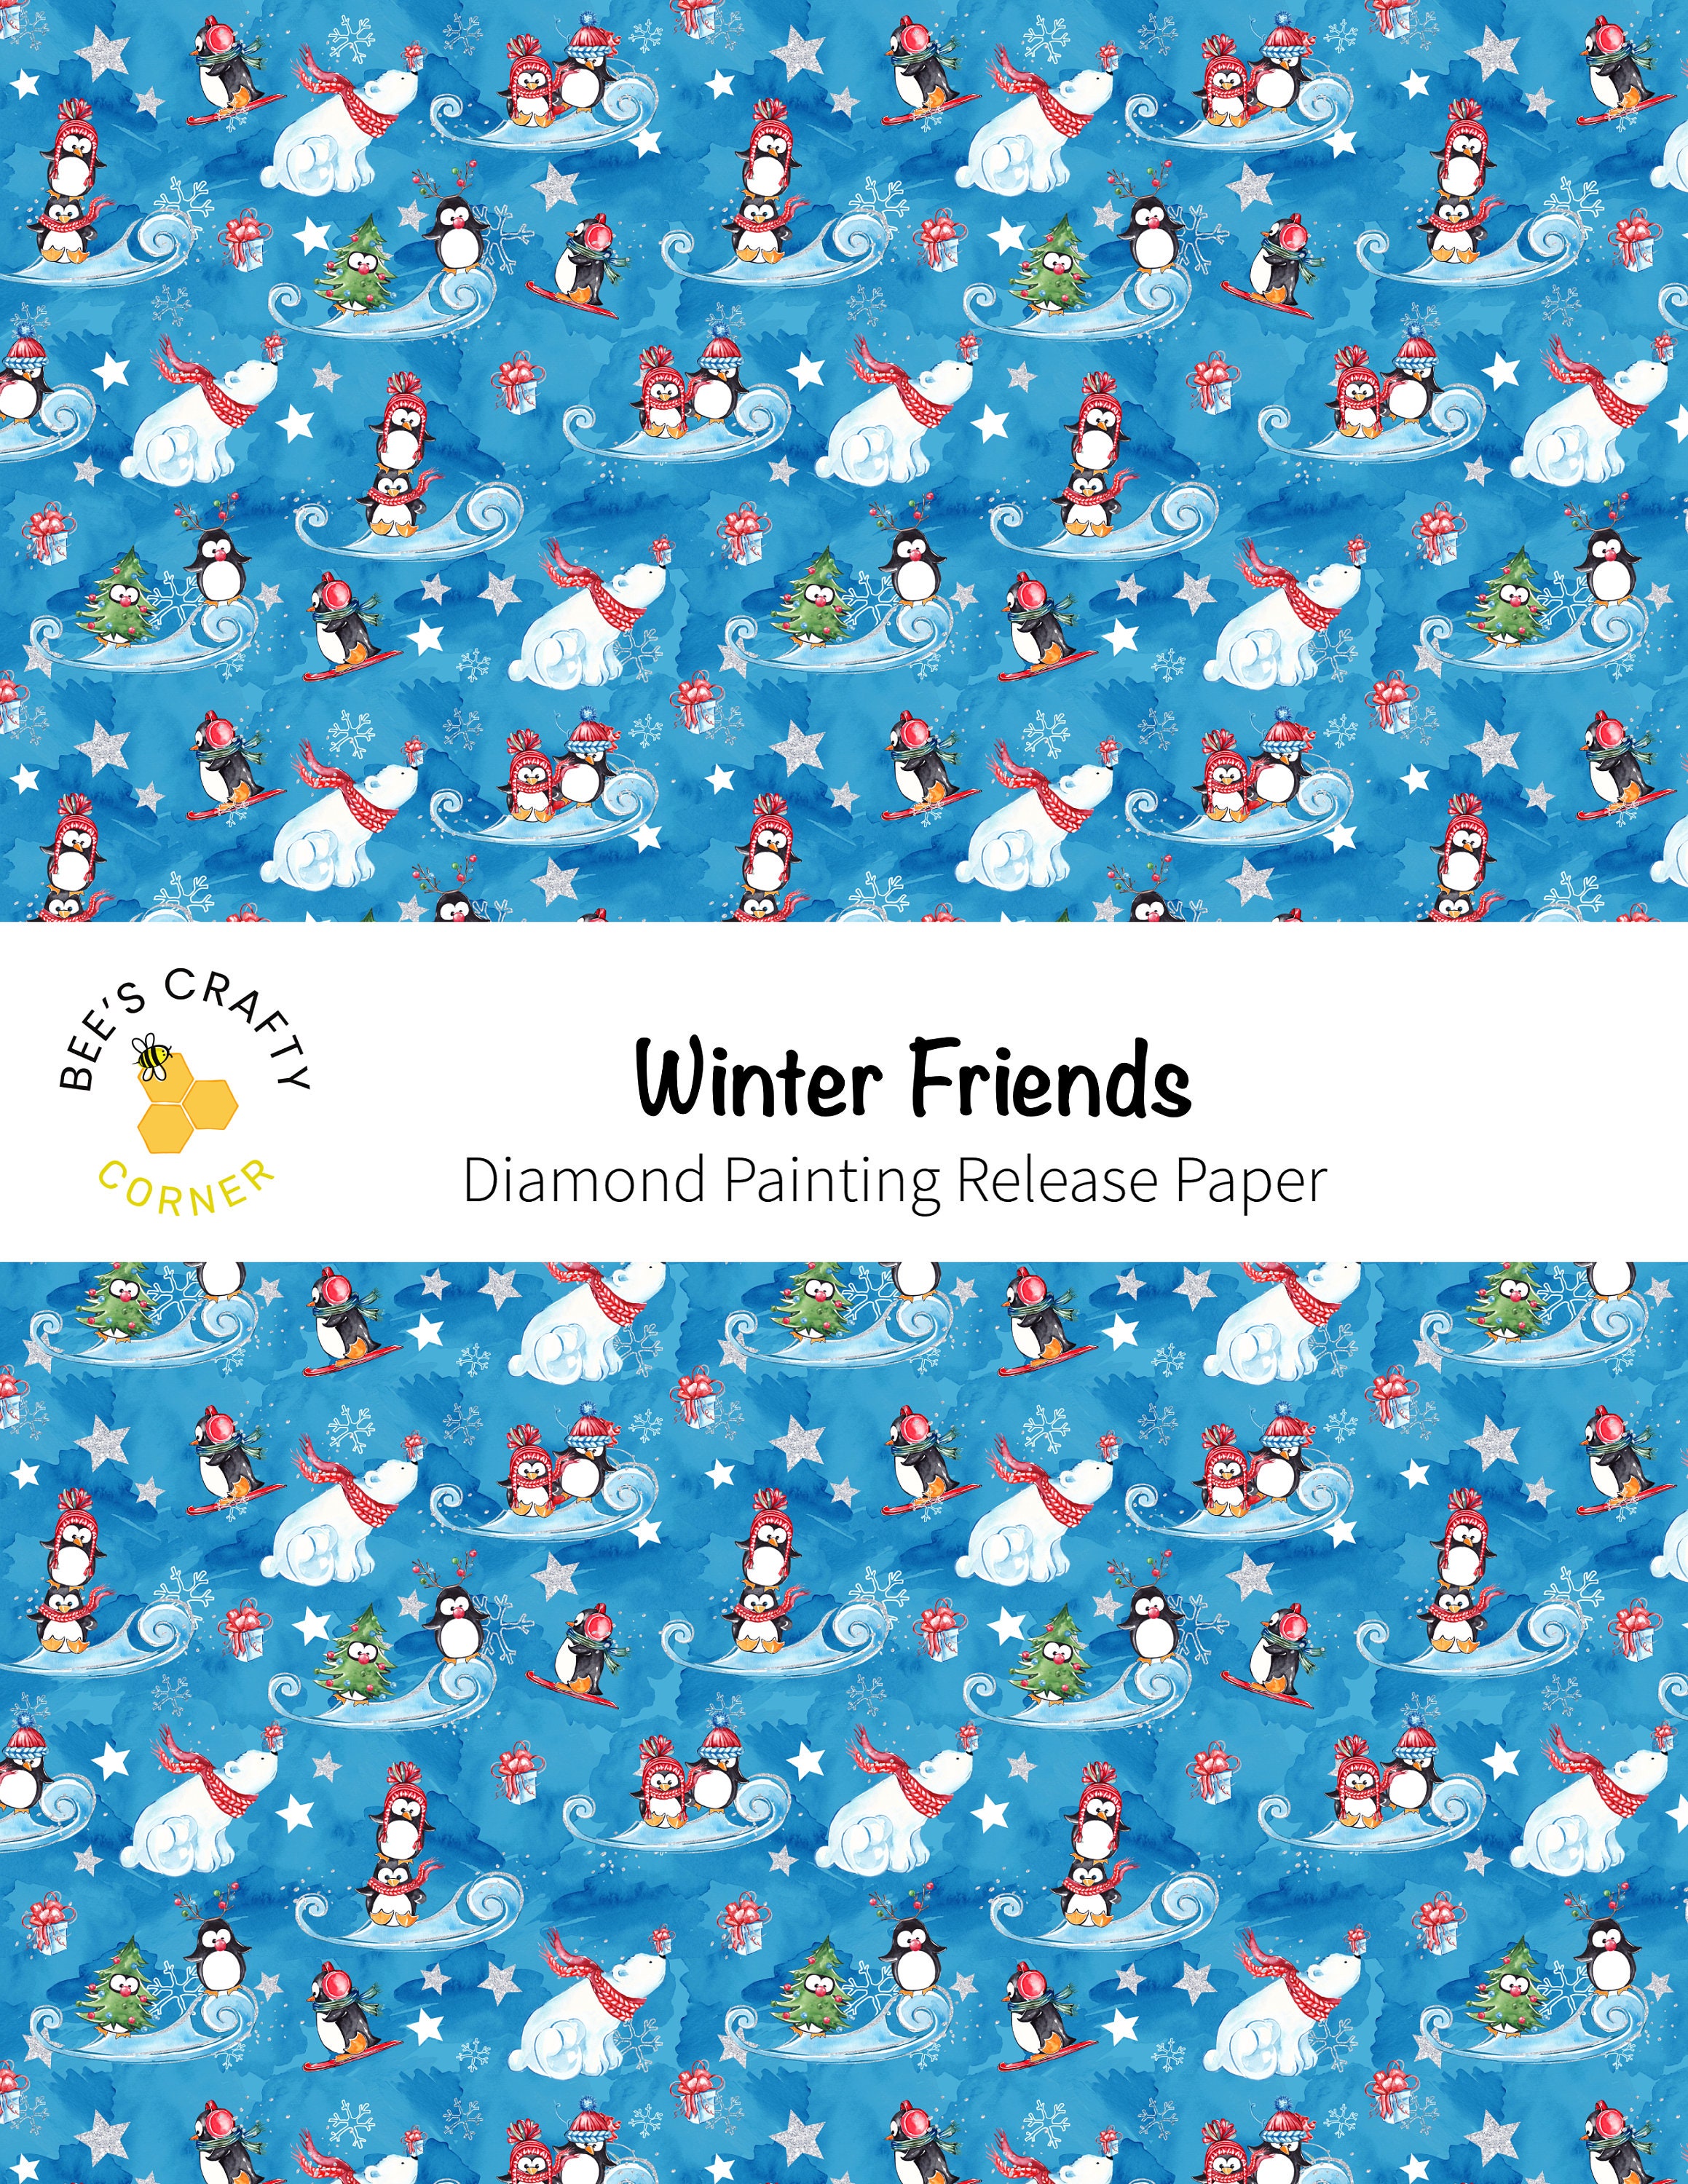 RELEASE PAPER Winter Friends Reusable Patterned Diamond Painting Release  Paper 